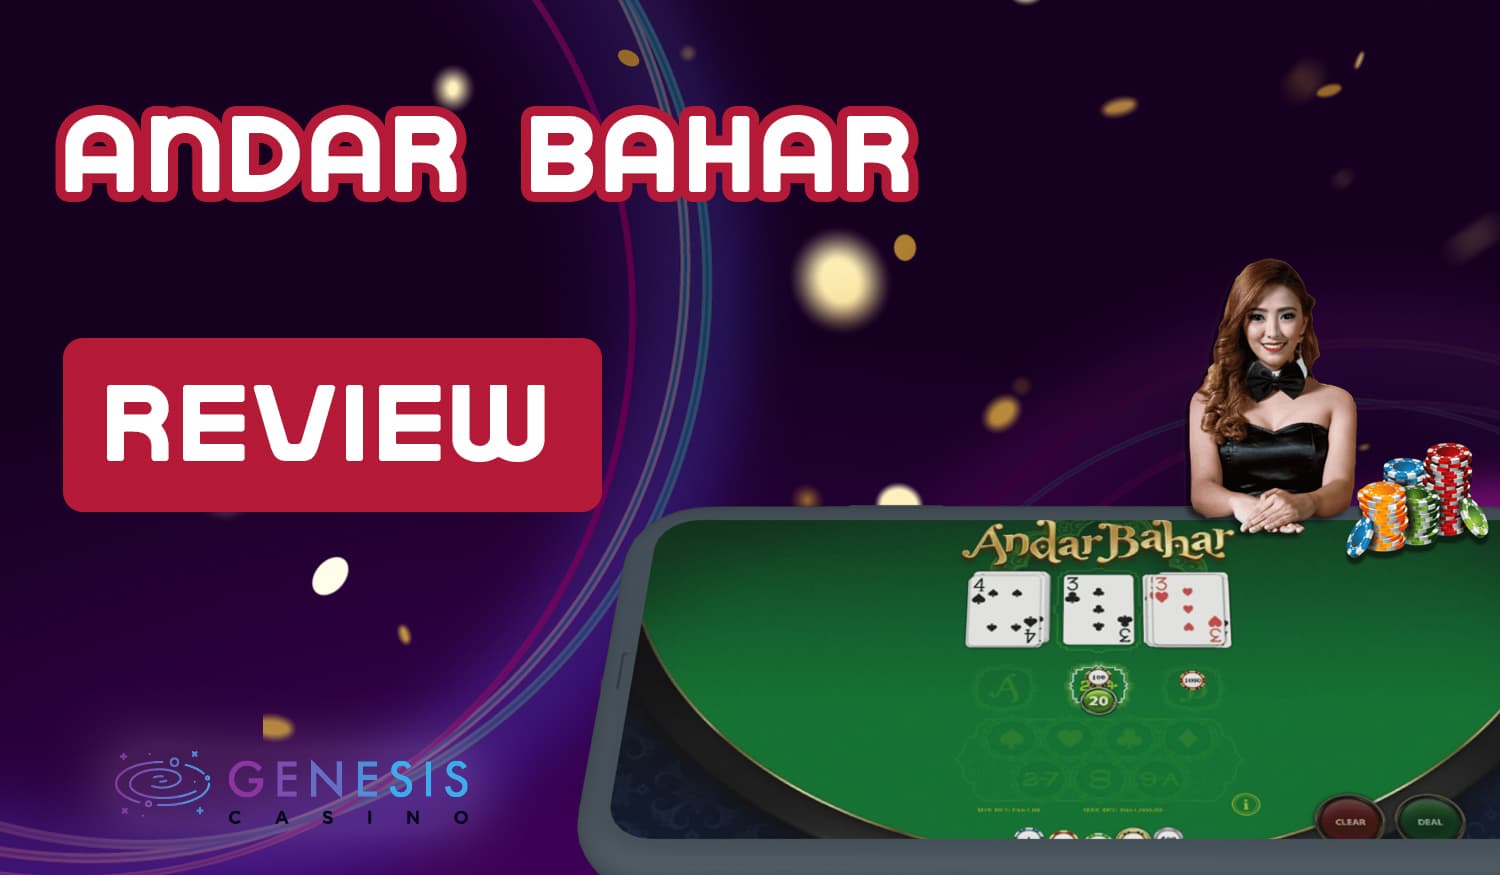 Basic rules and features of playing Andar Bahar on Genesis India